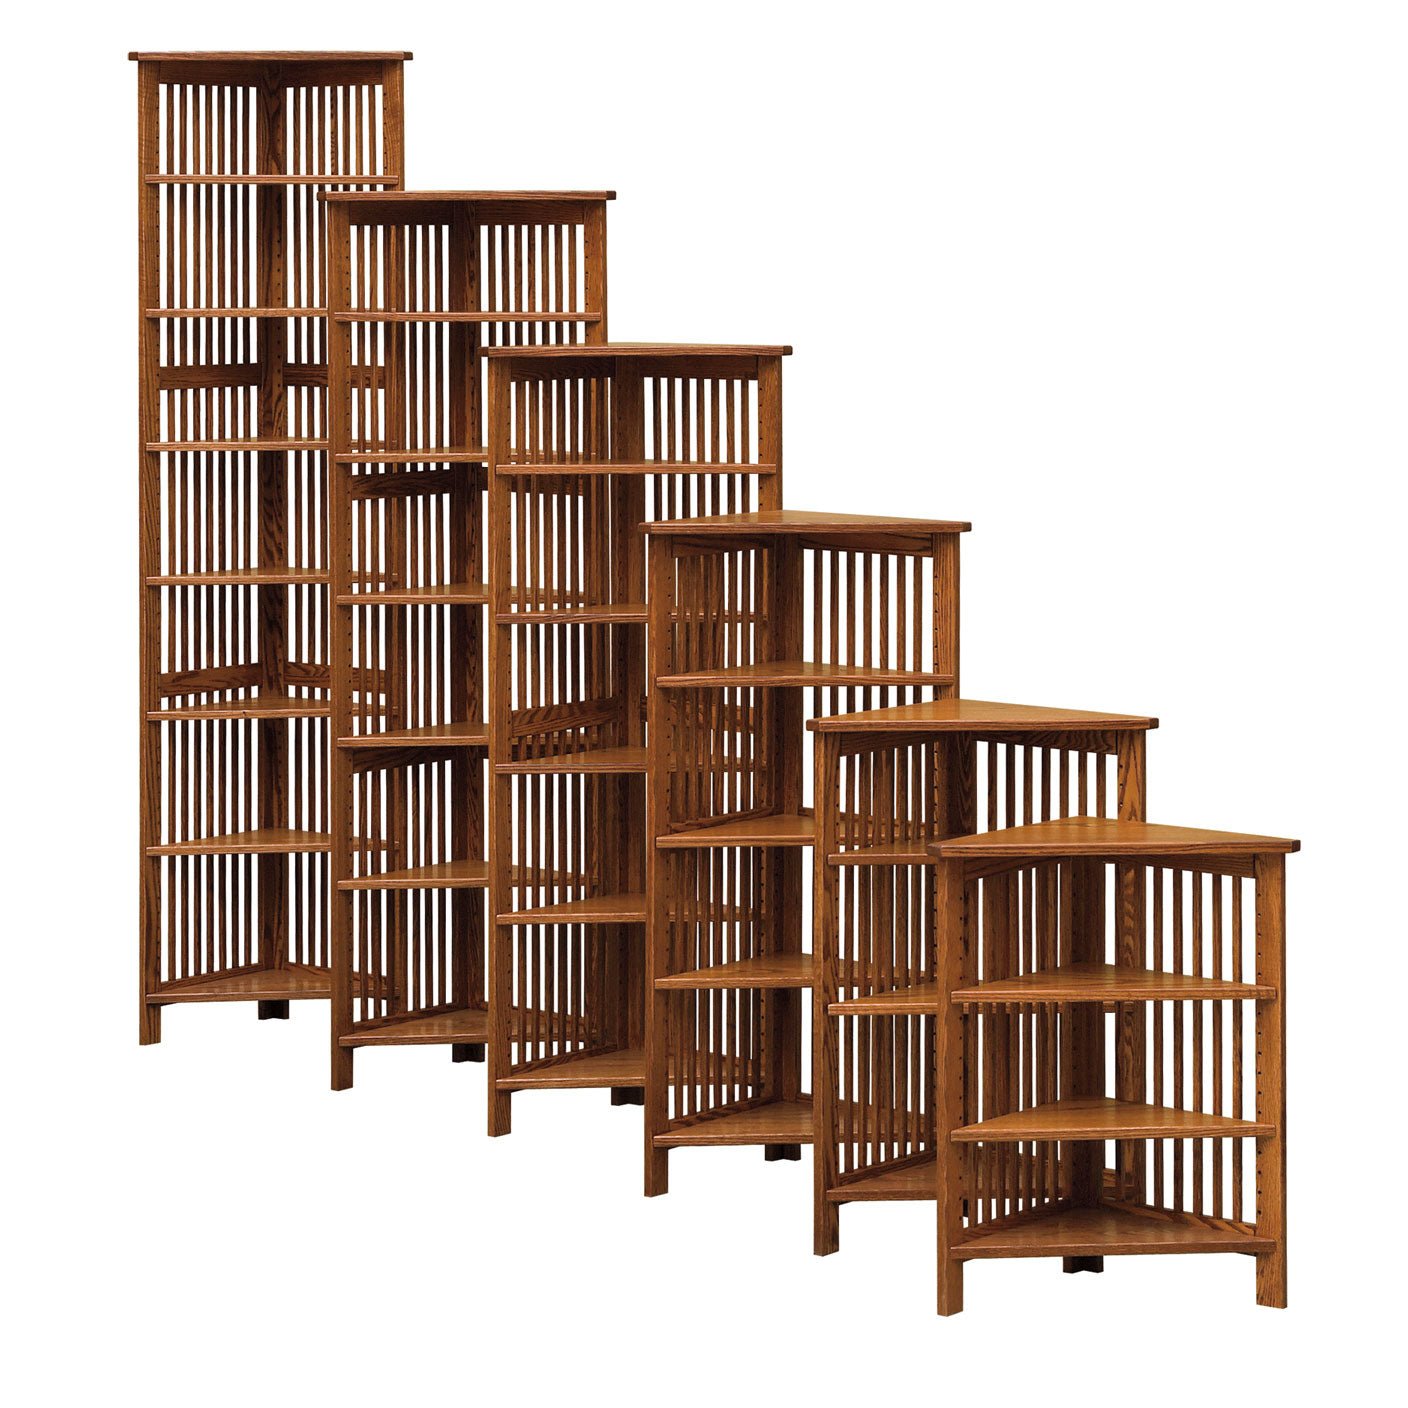 Country Mission Small Corner Bookcase - snyders.furniture